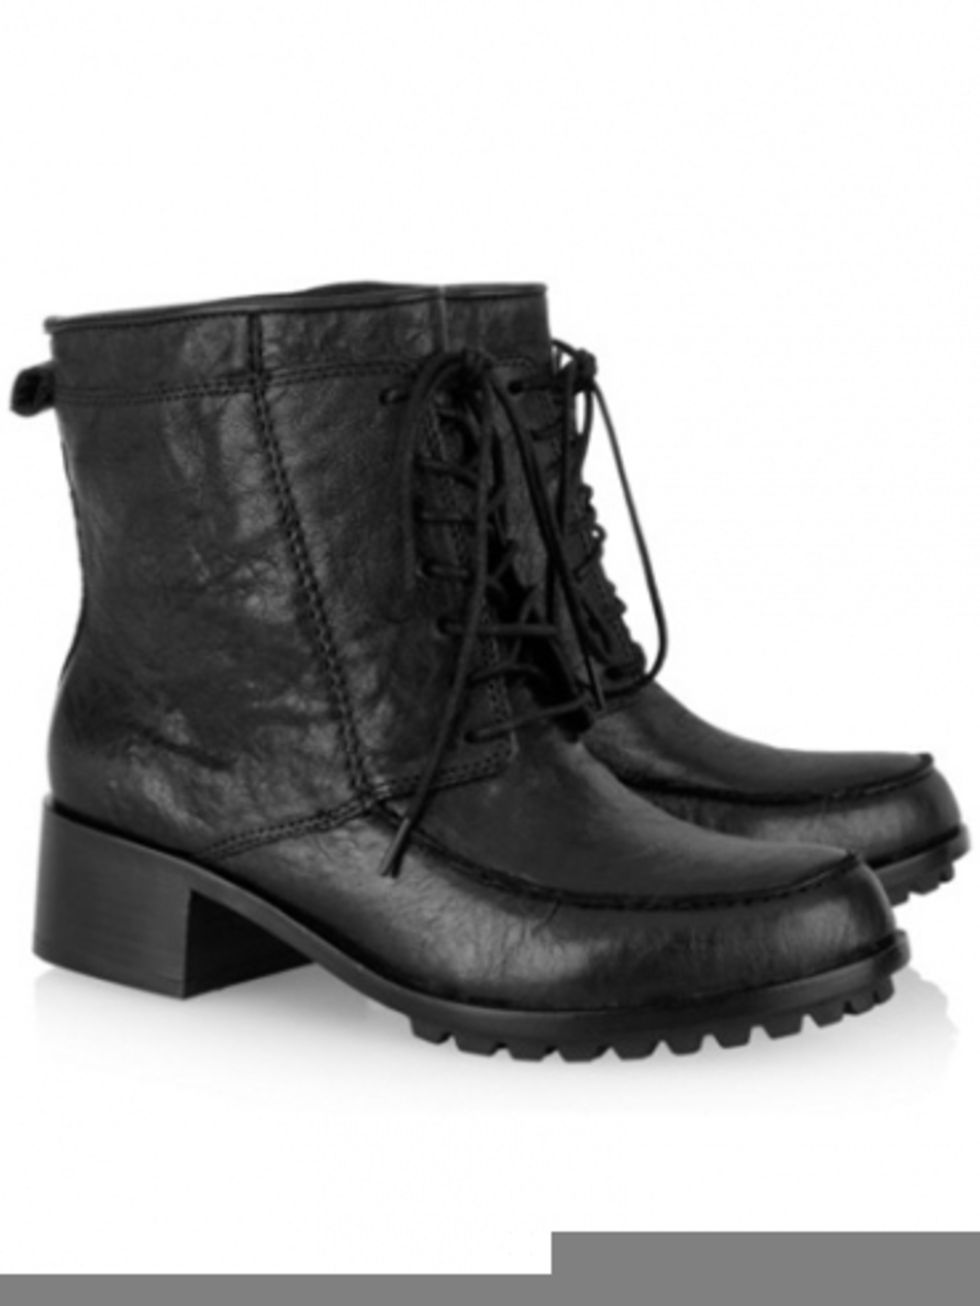 Footwear, Boot, Shoe, Fashion, Black, Leather, Work boots, Still life photography, Synthetic rubber, Motorcycle boot, 